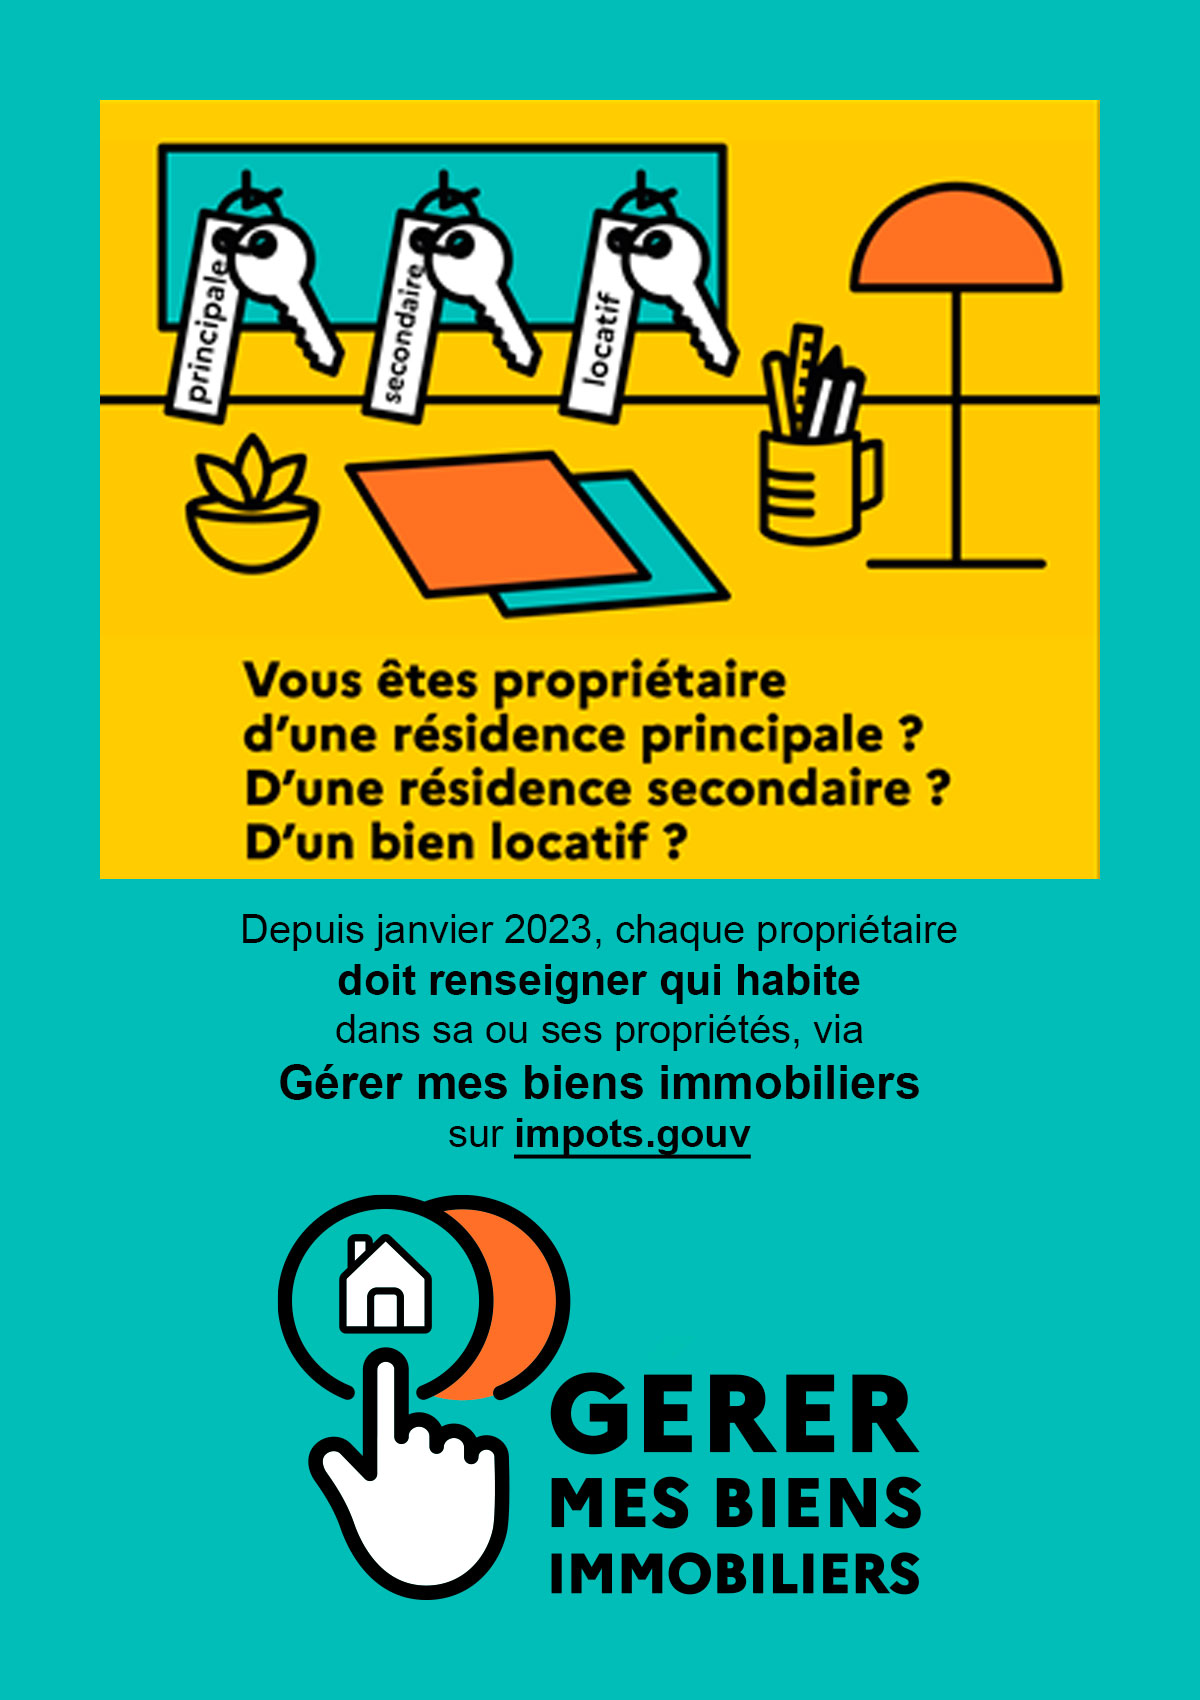 gerer-mes-biens-immobiliers